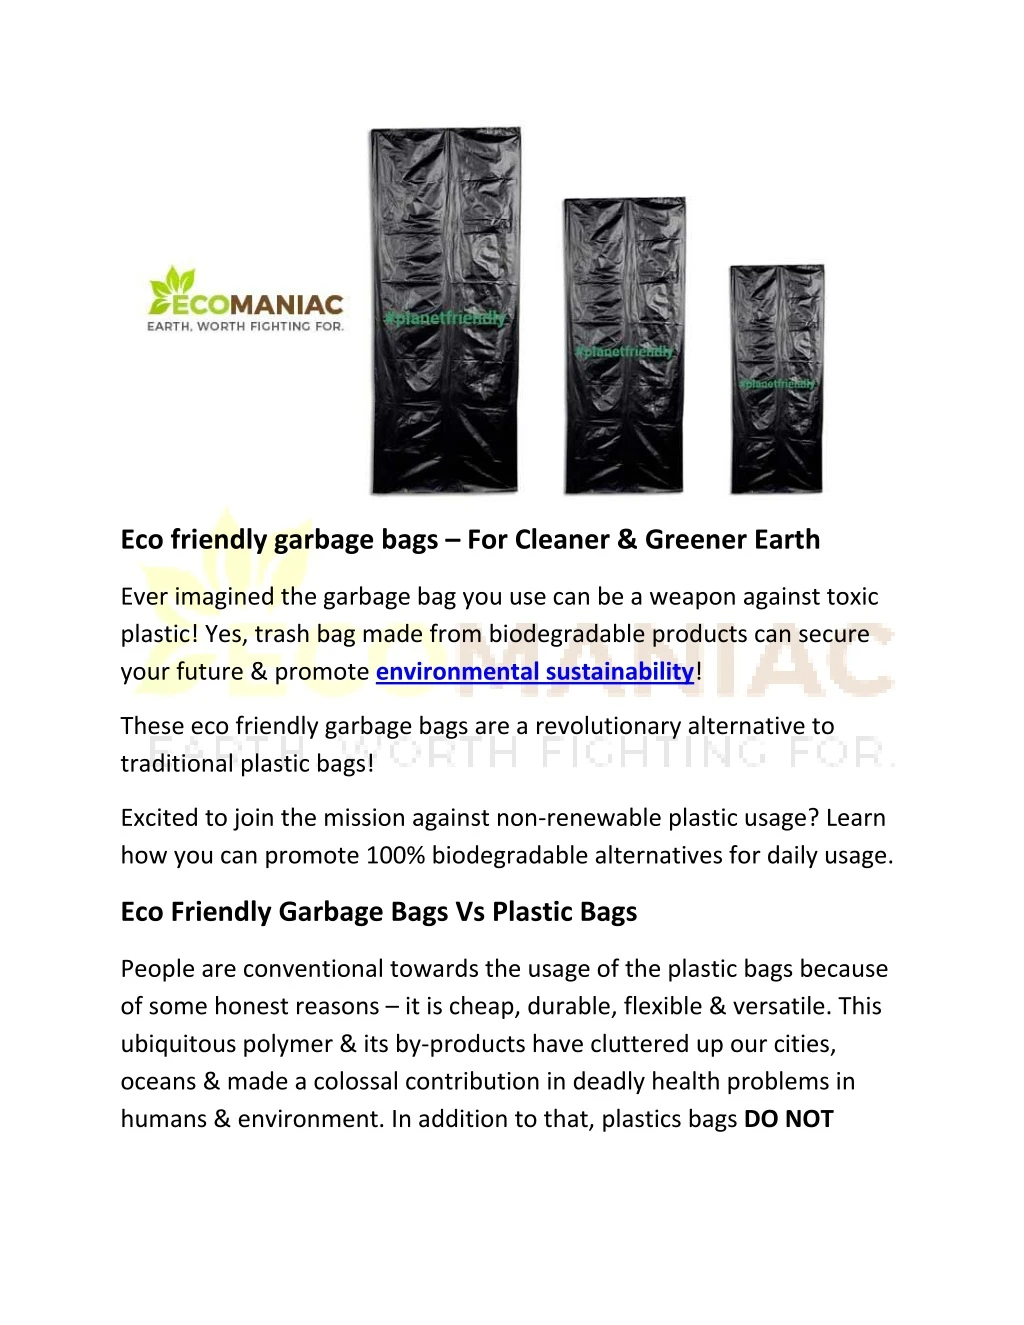 eco friendly garbage bags for cleaner greener